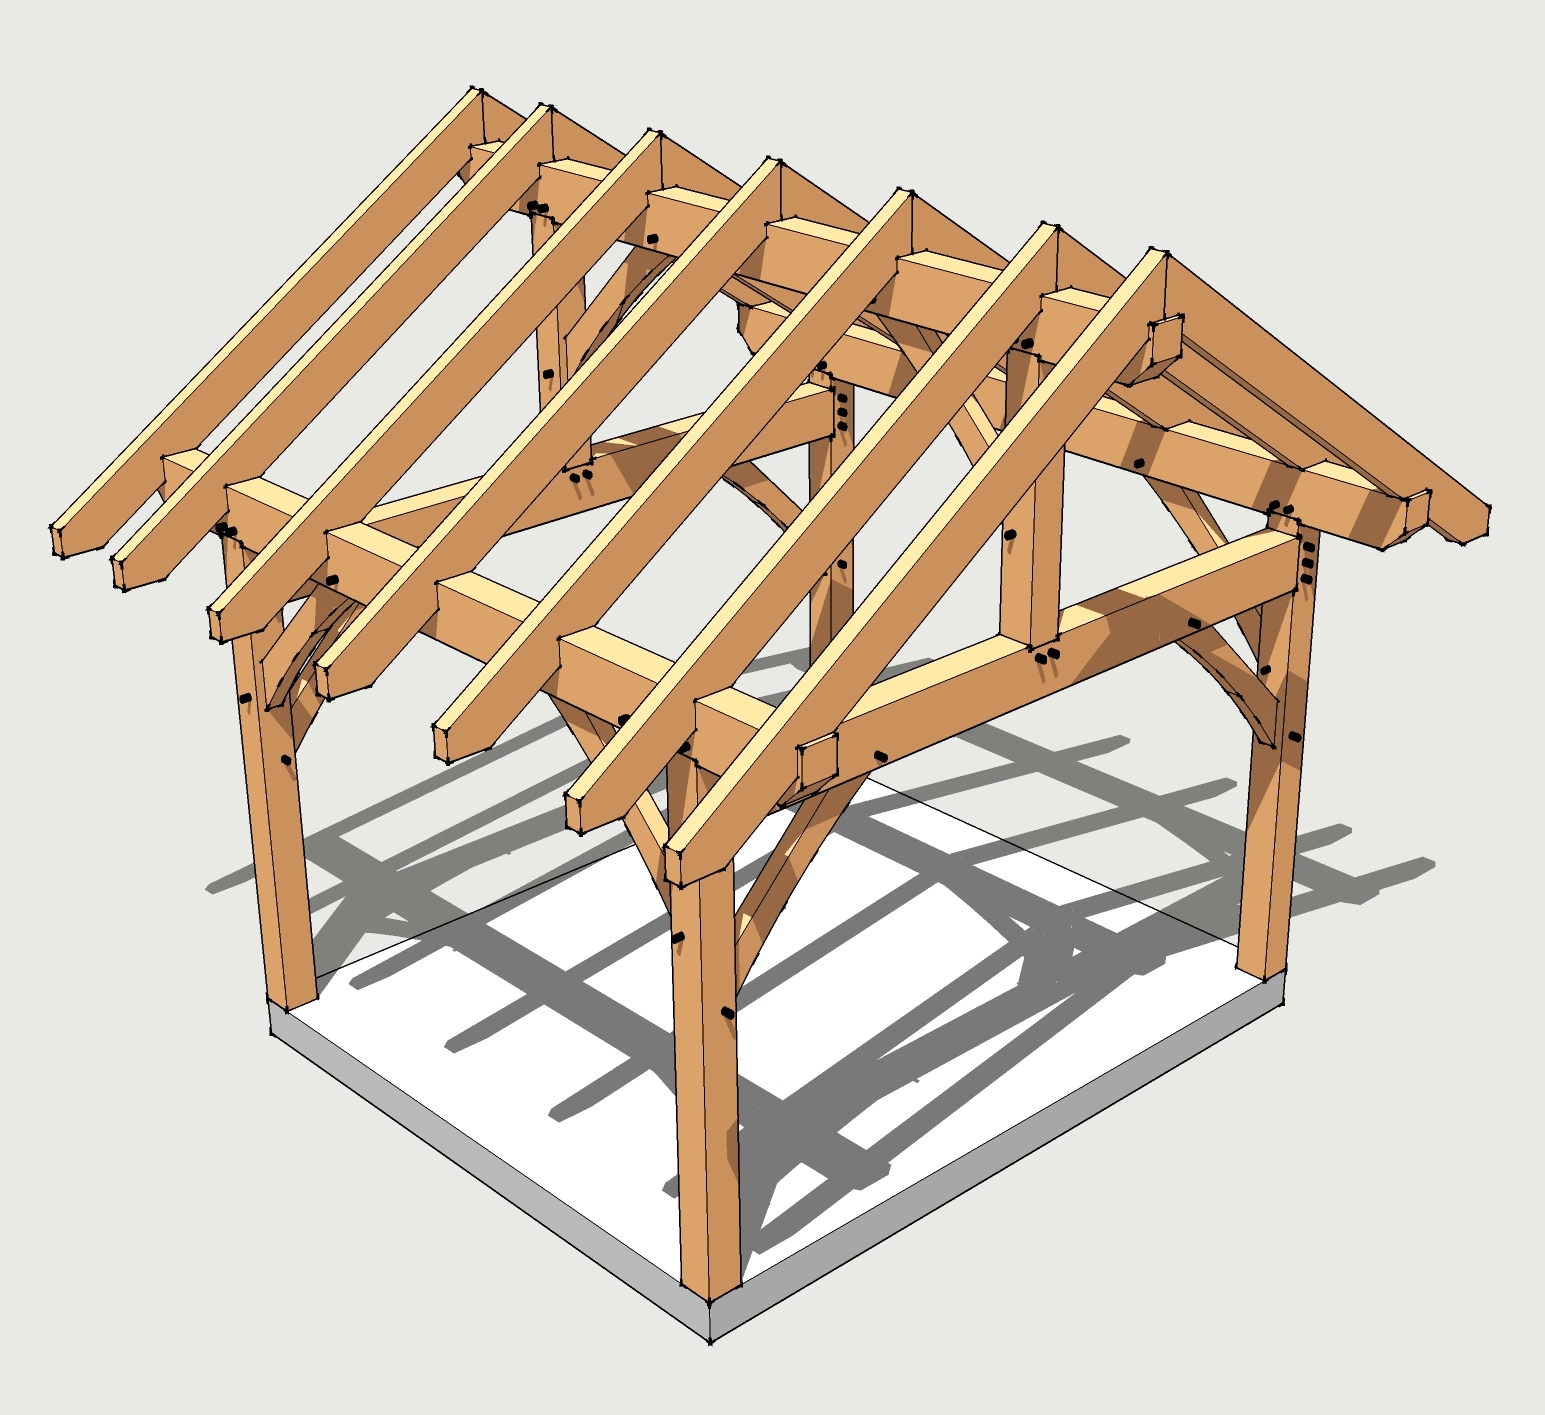 ... : Gazebo Roof Plans | Free Outdoor Plans DIY Shed, Wooden Playhouse